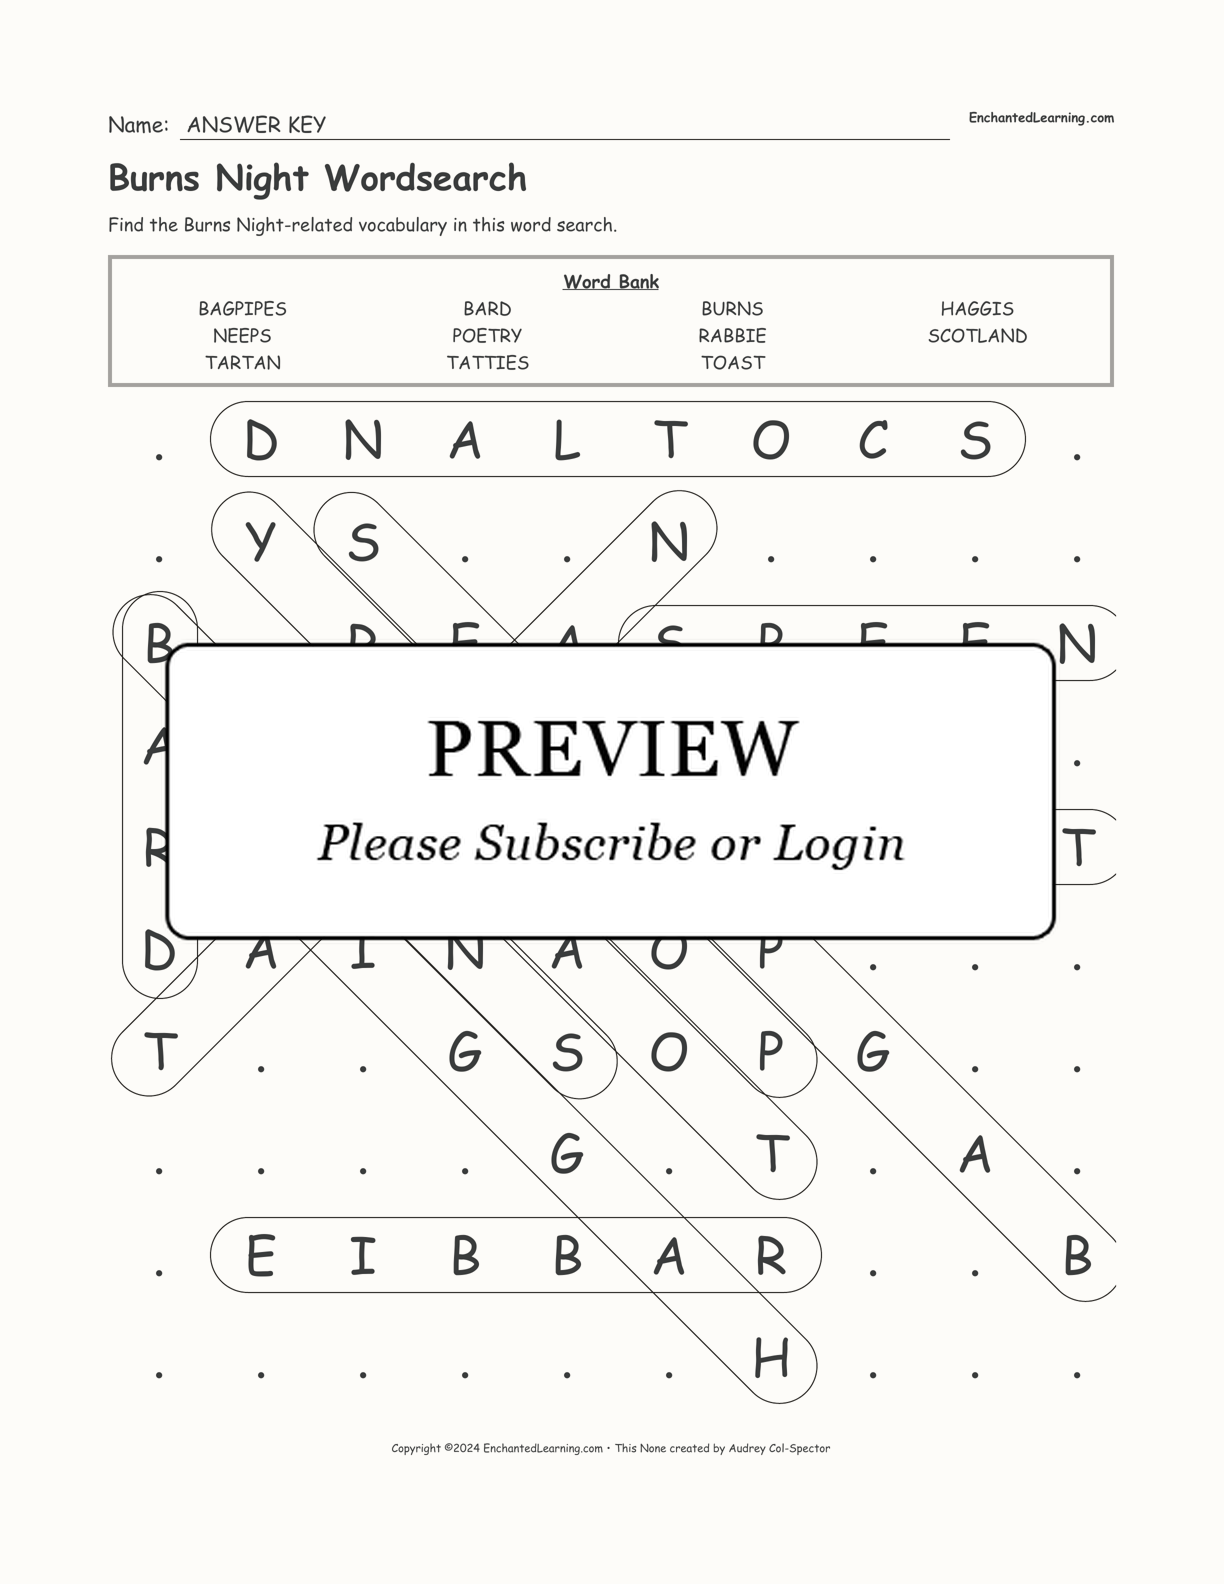 Burns Night Wordsearch interactive worksheet page 2